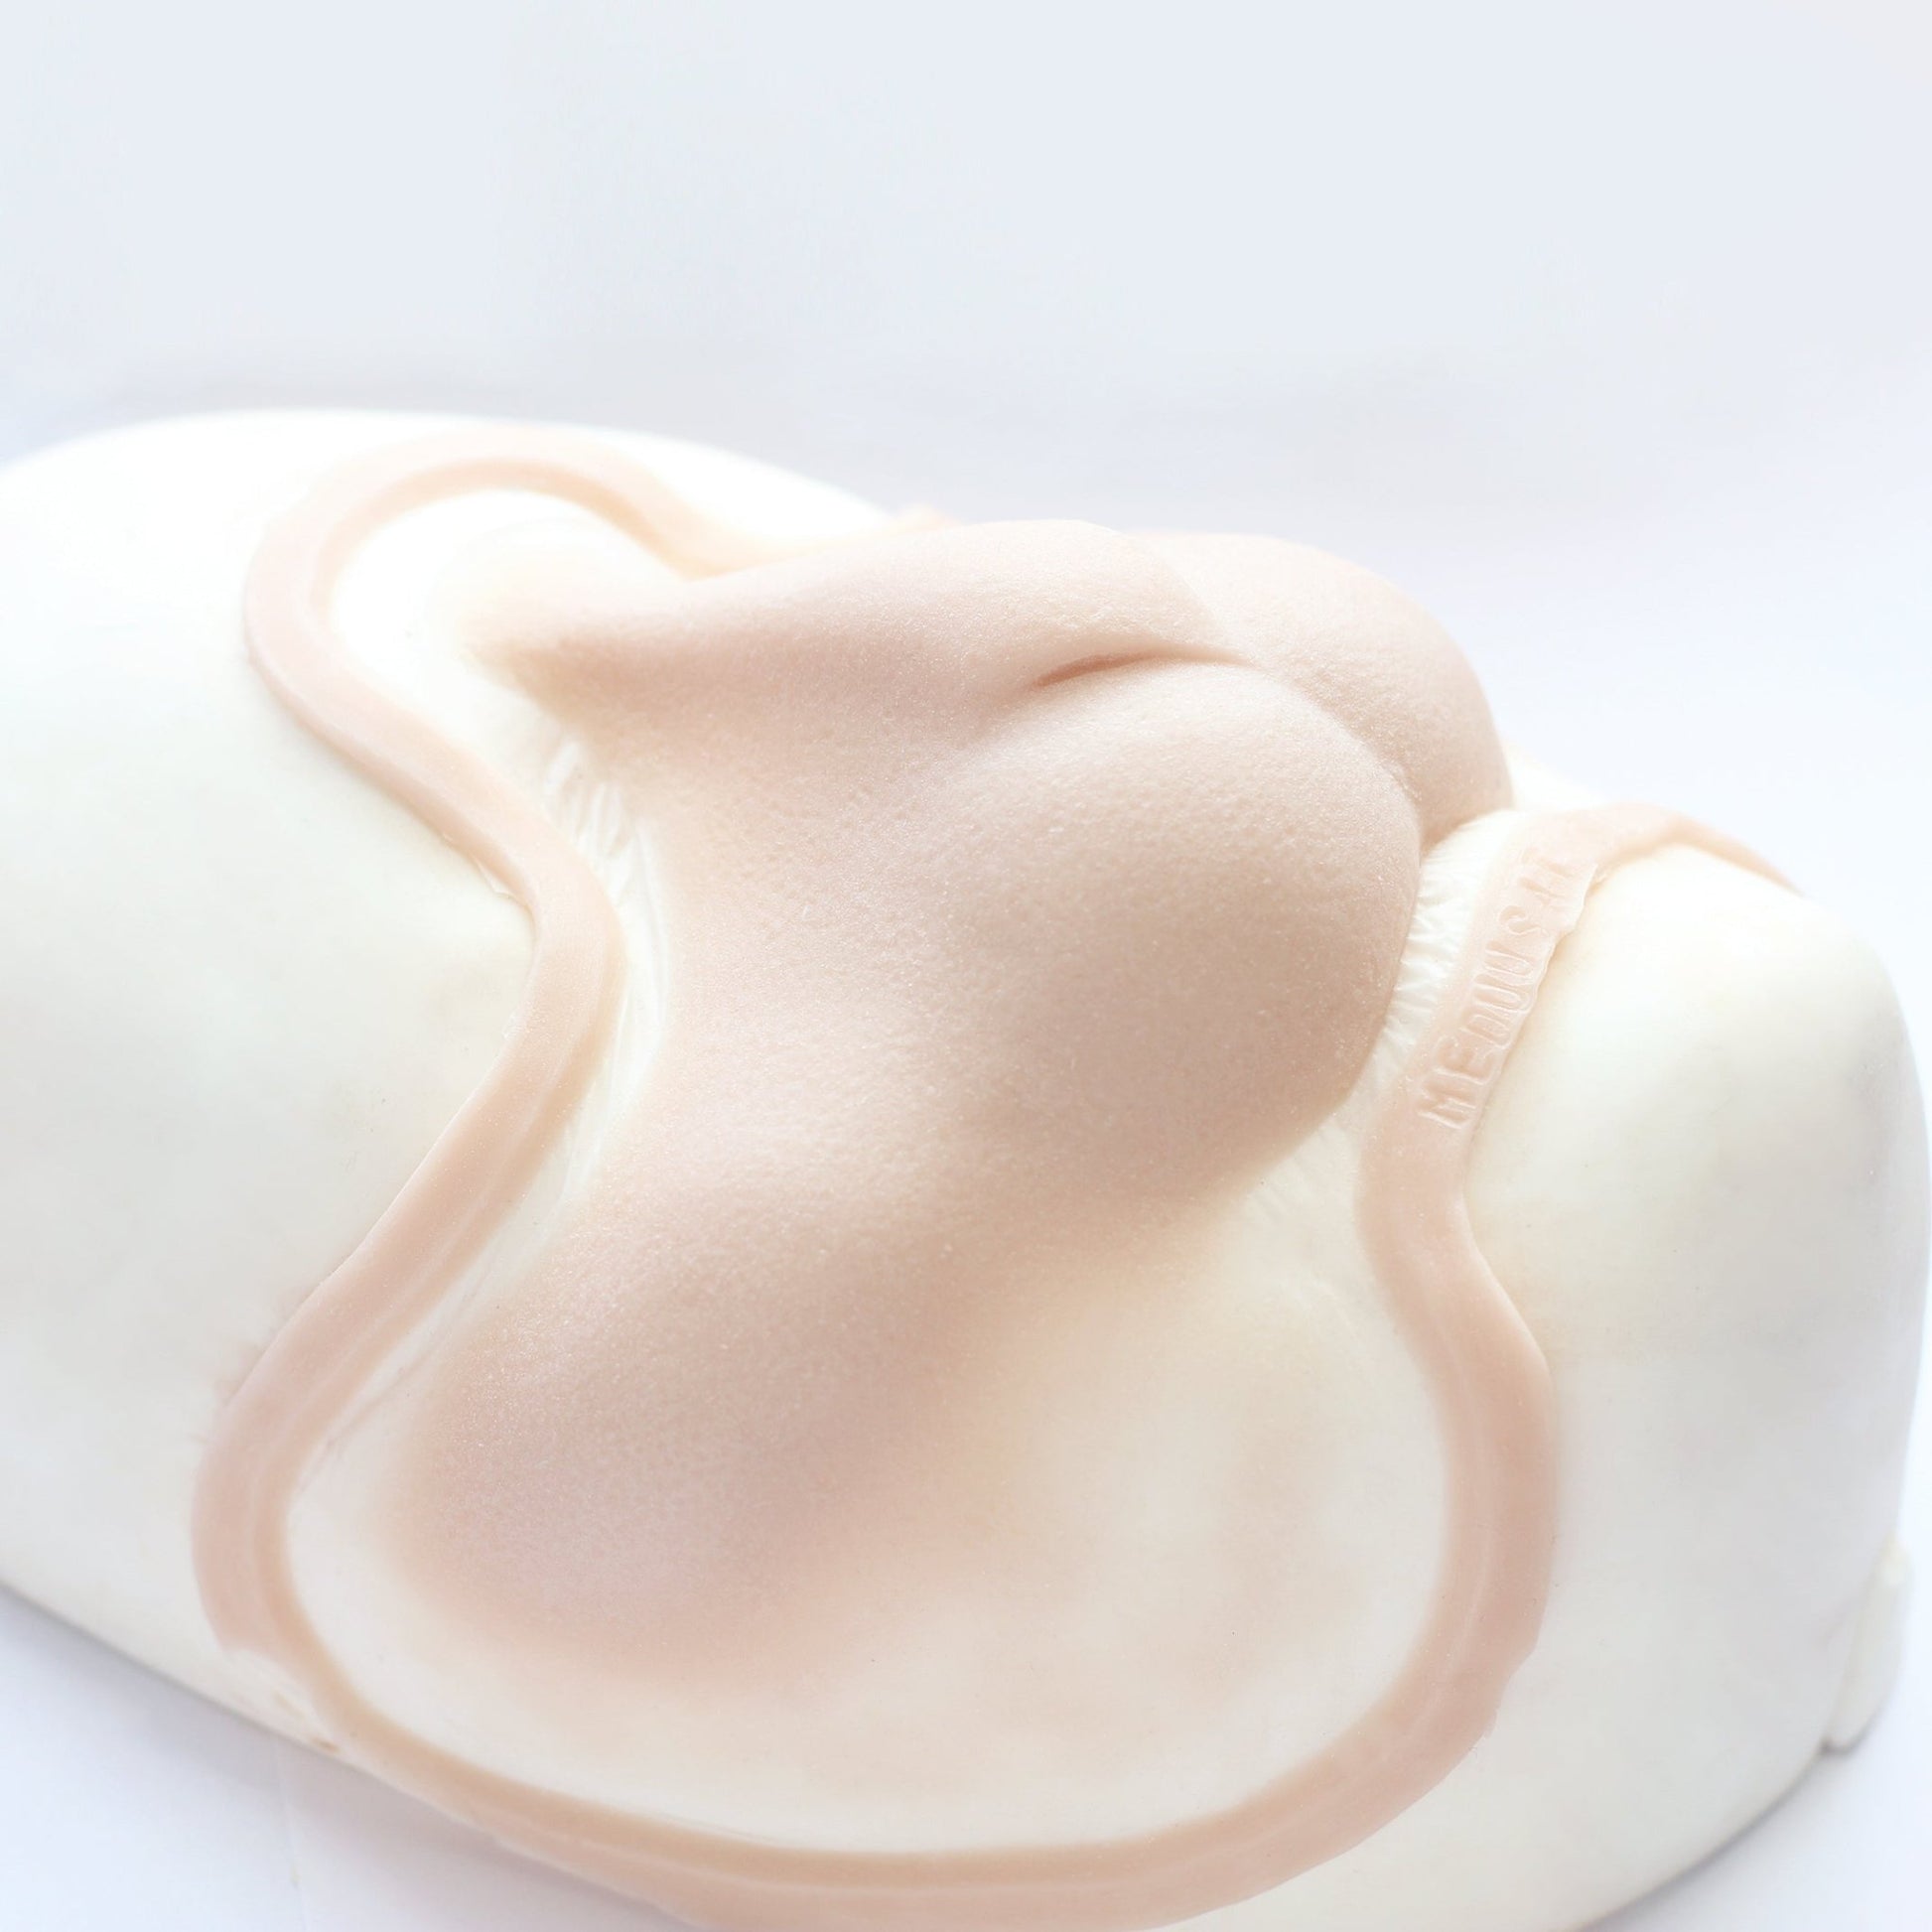 Bunny Nose - Silicone makeup prosthetic in vanilla shade on a white surface